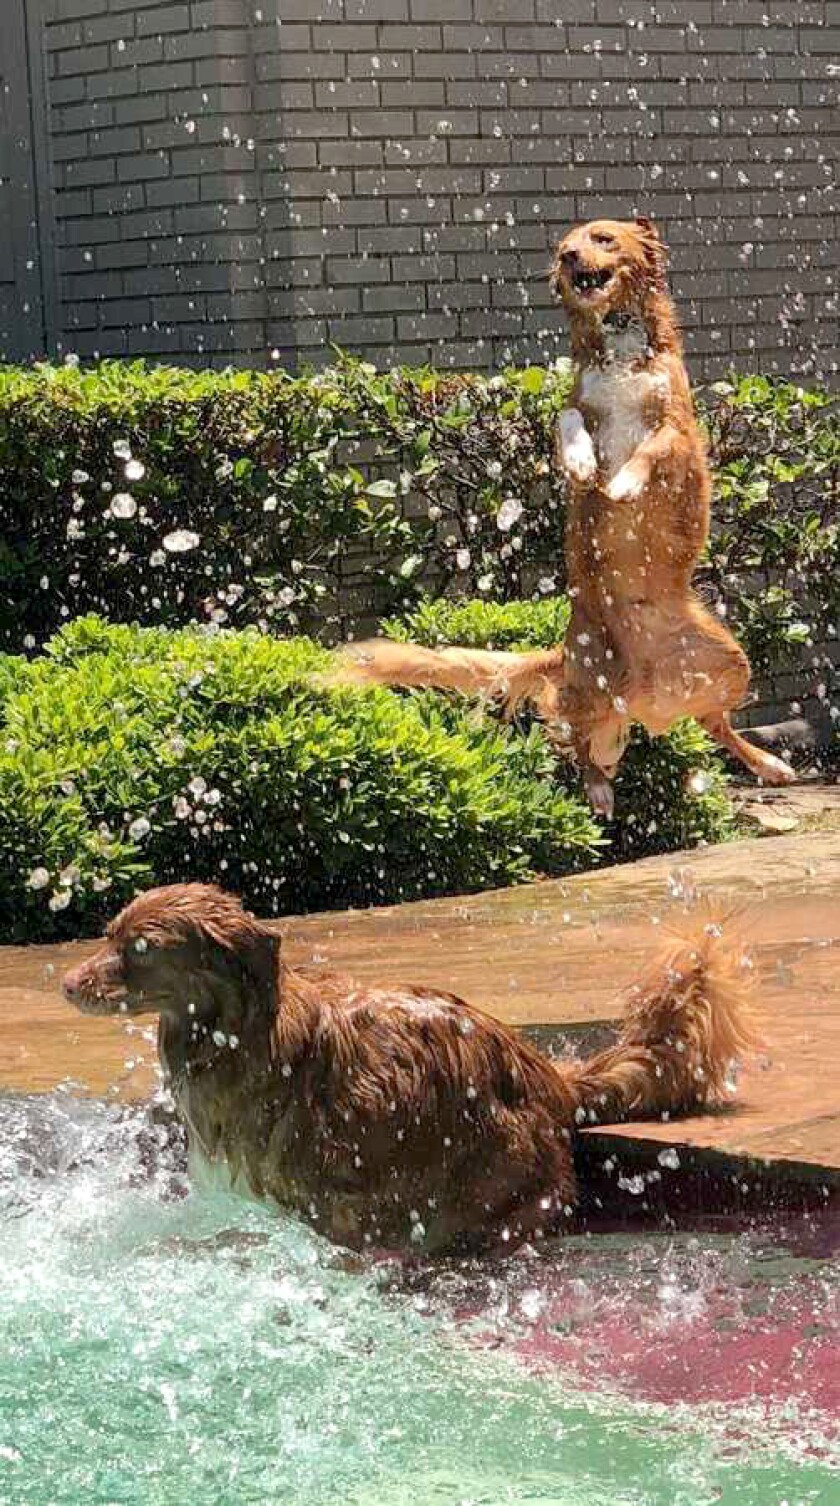 Nova Scotia duck toll collectors, Brandy in the pool gets splashed by Tucker who hops for joy.